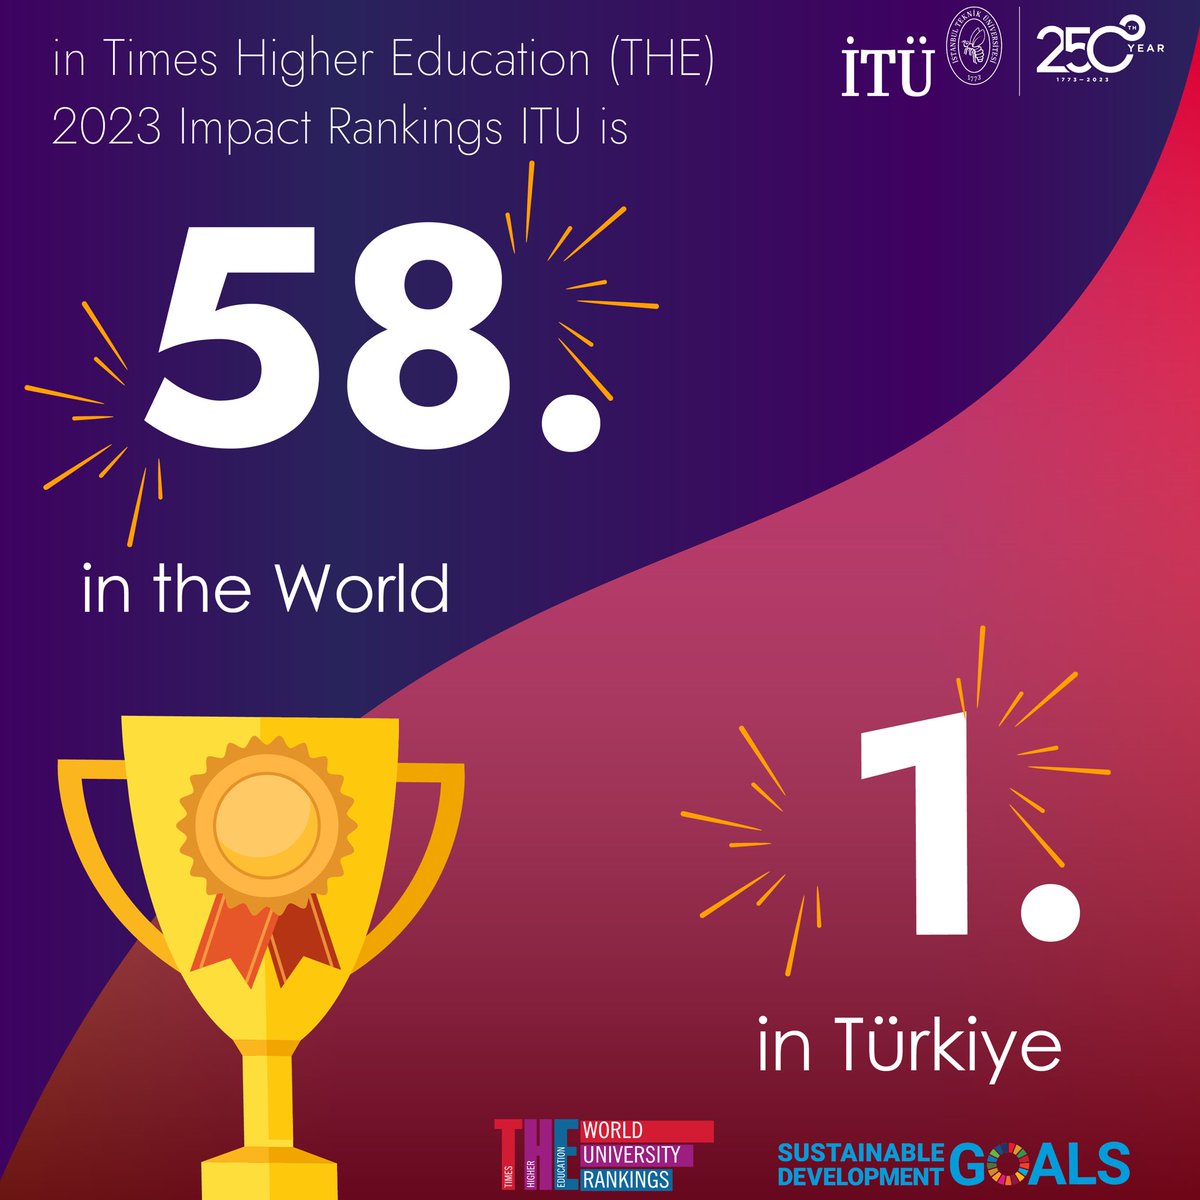 Our university is in the top 10 worldwide under two goals and ranks 1st in Türkiye and 58th in the world in @timeshighered 2023 Impact Rankings which covers the @UN 17 SDG.🏅🐝 #ITUisProud #ITU250years  #THEGlobalImpact #THEunirankings #THEImpact23

🔗 timeshighereducation.com/impactrankings